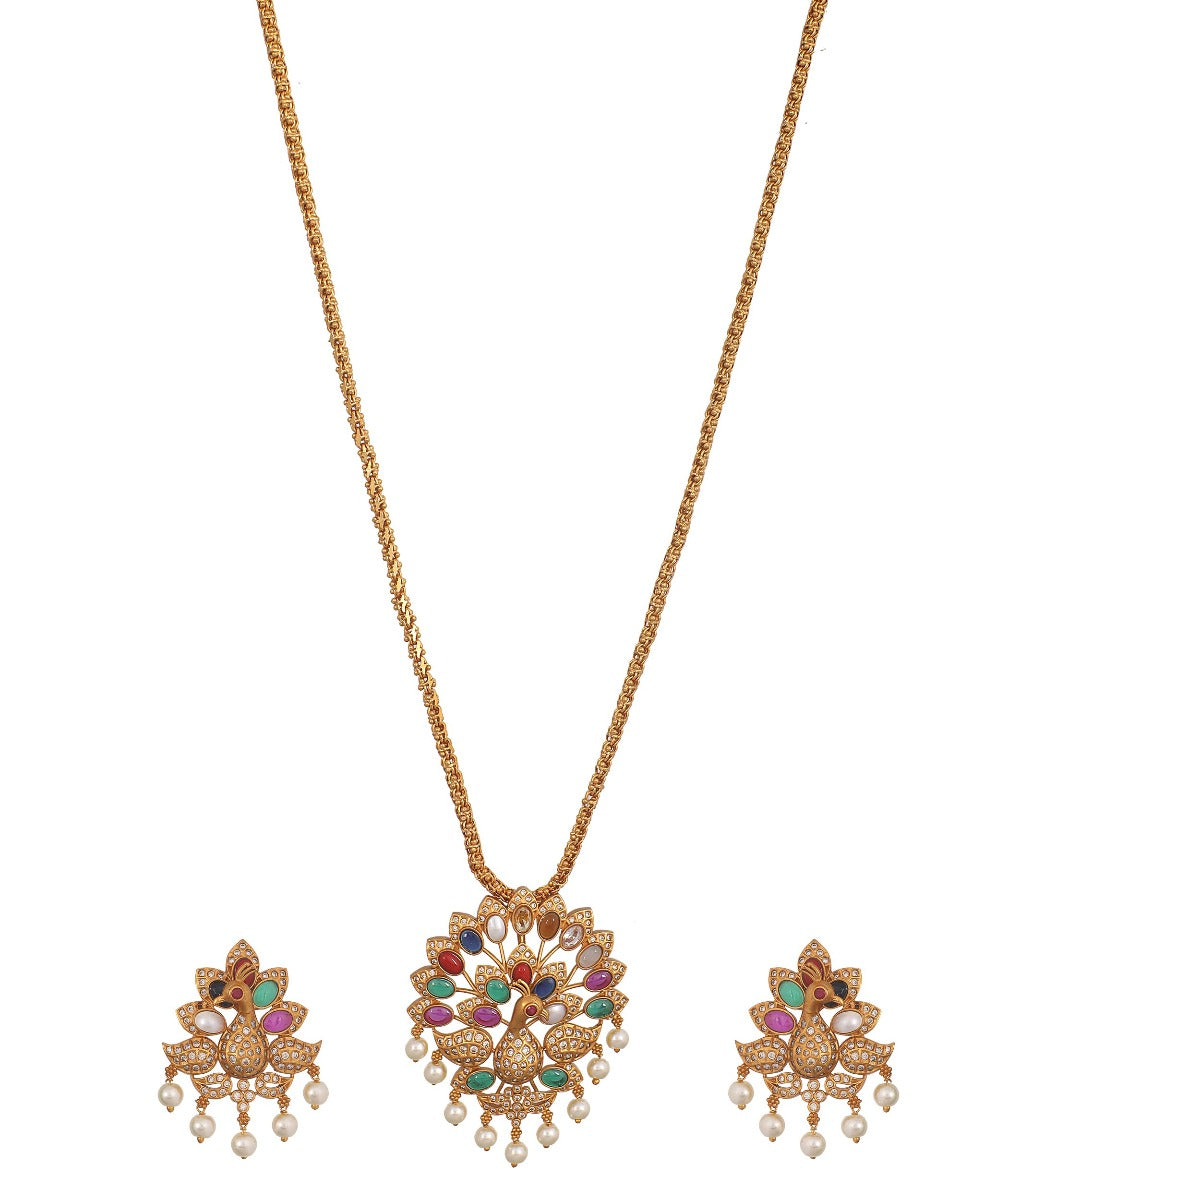 Antique Gold Plated Maher Pendant Earring Set